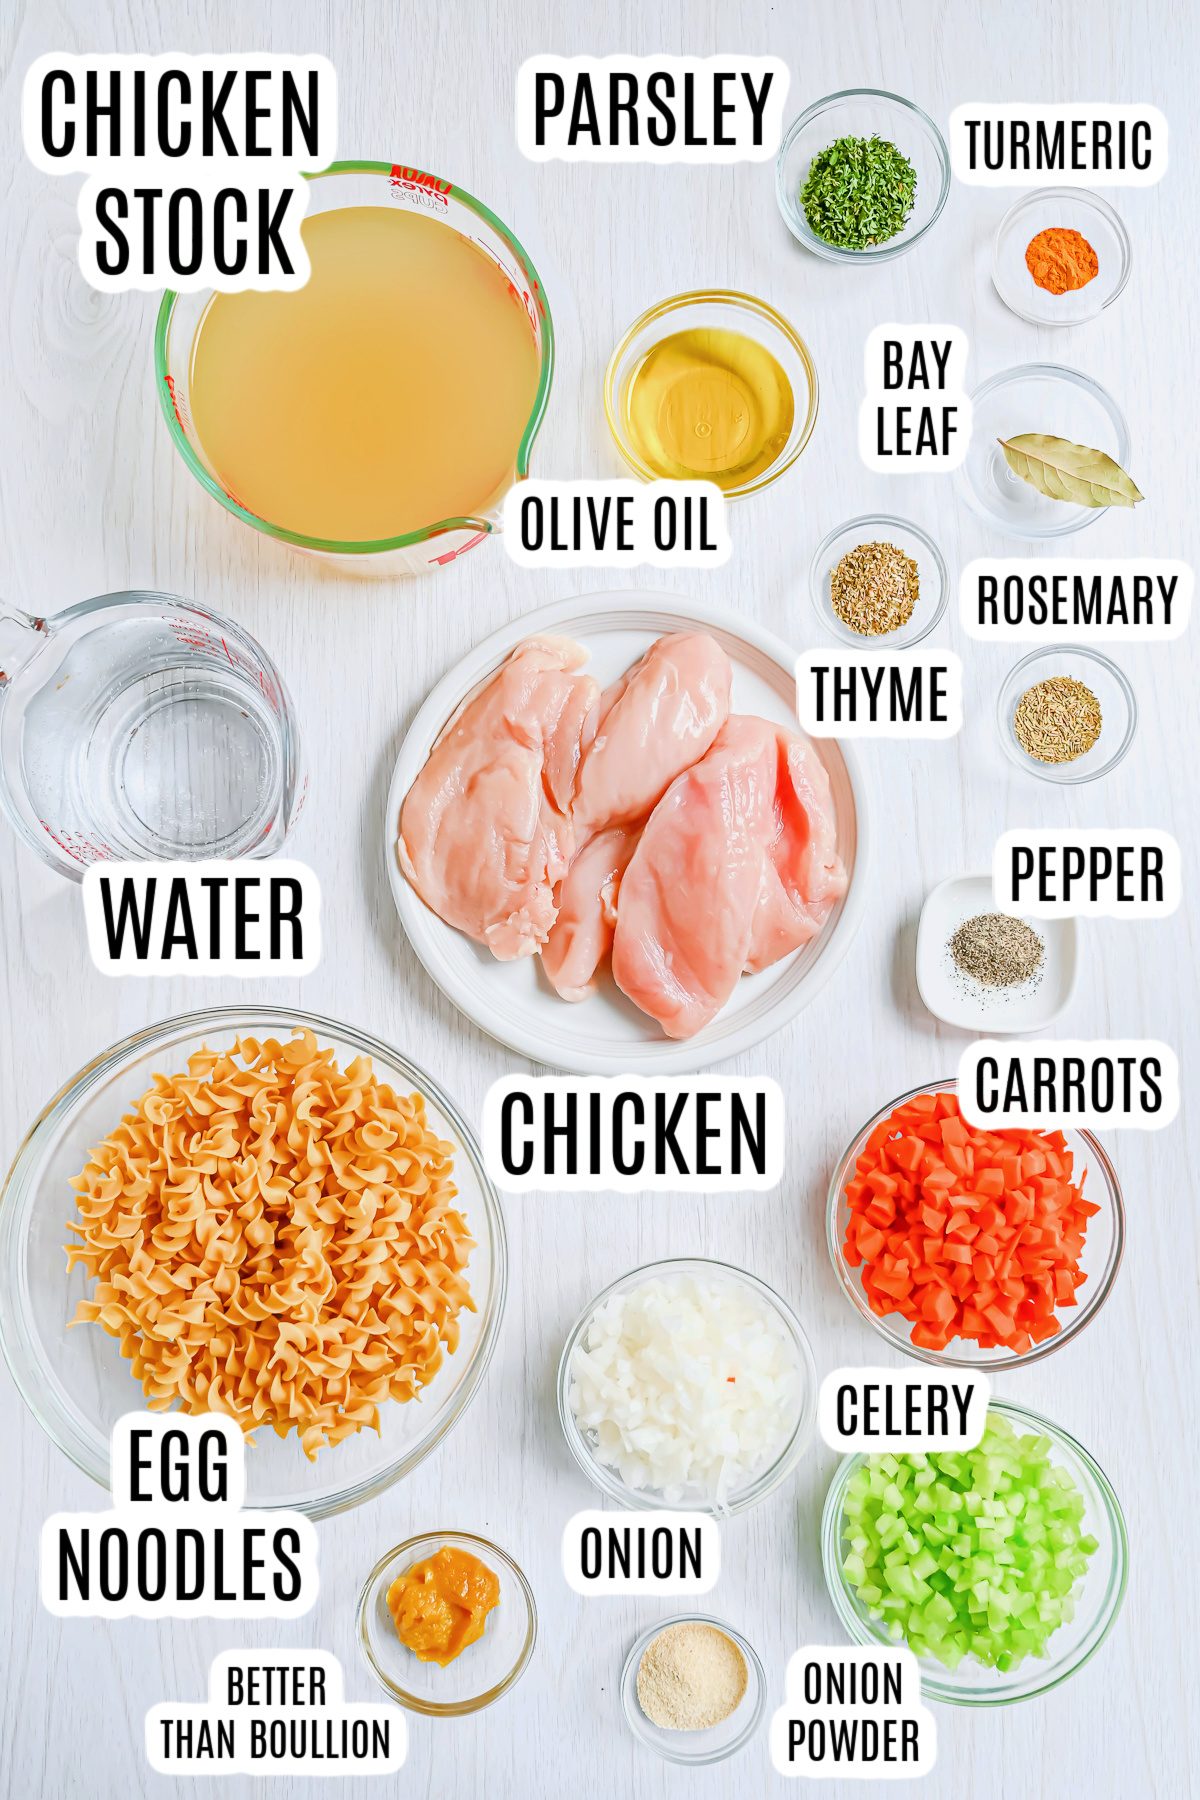 All the ingredients needed to make the Panera Chicken Noodle Soup (Copycat Recipe) including: chicken stock, parsley, turmeric, a bay leaf, olive oil, rosmemary, thyme, black pepper, carrots, chicken, egg noodles, onion, celery, onion powder, Better Than Boullion, and water.